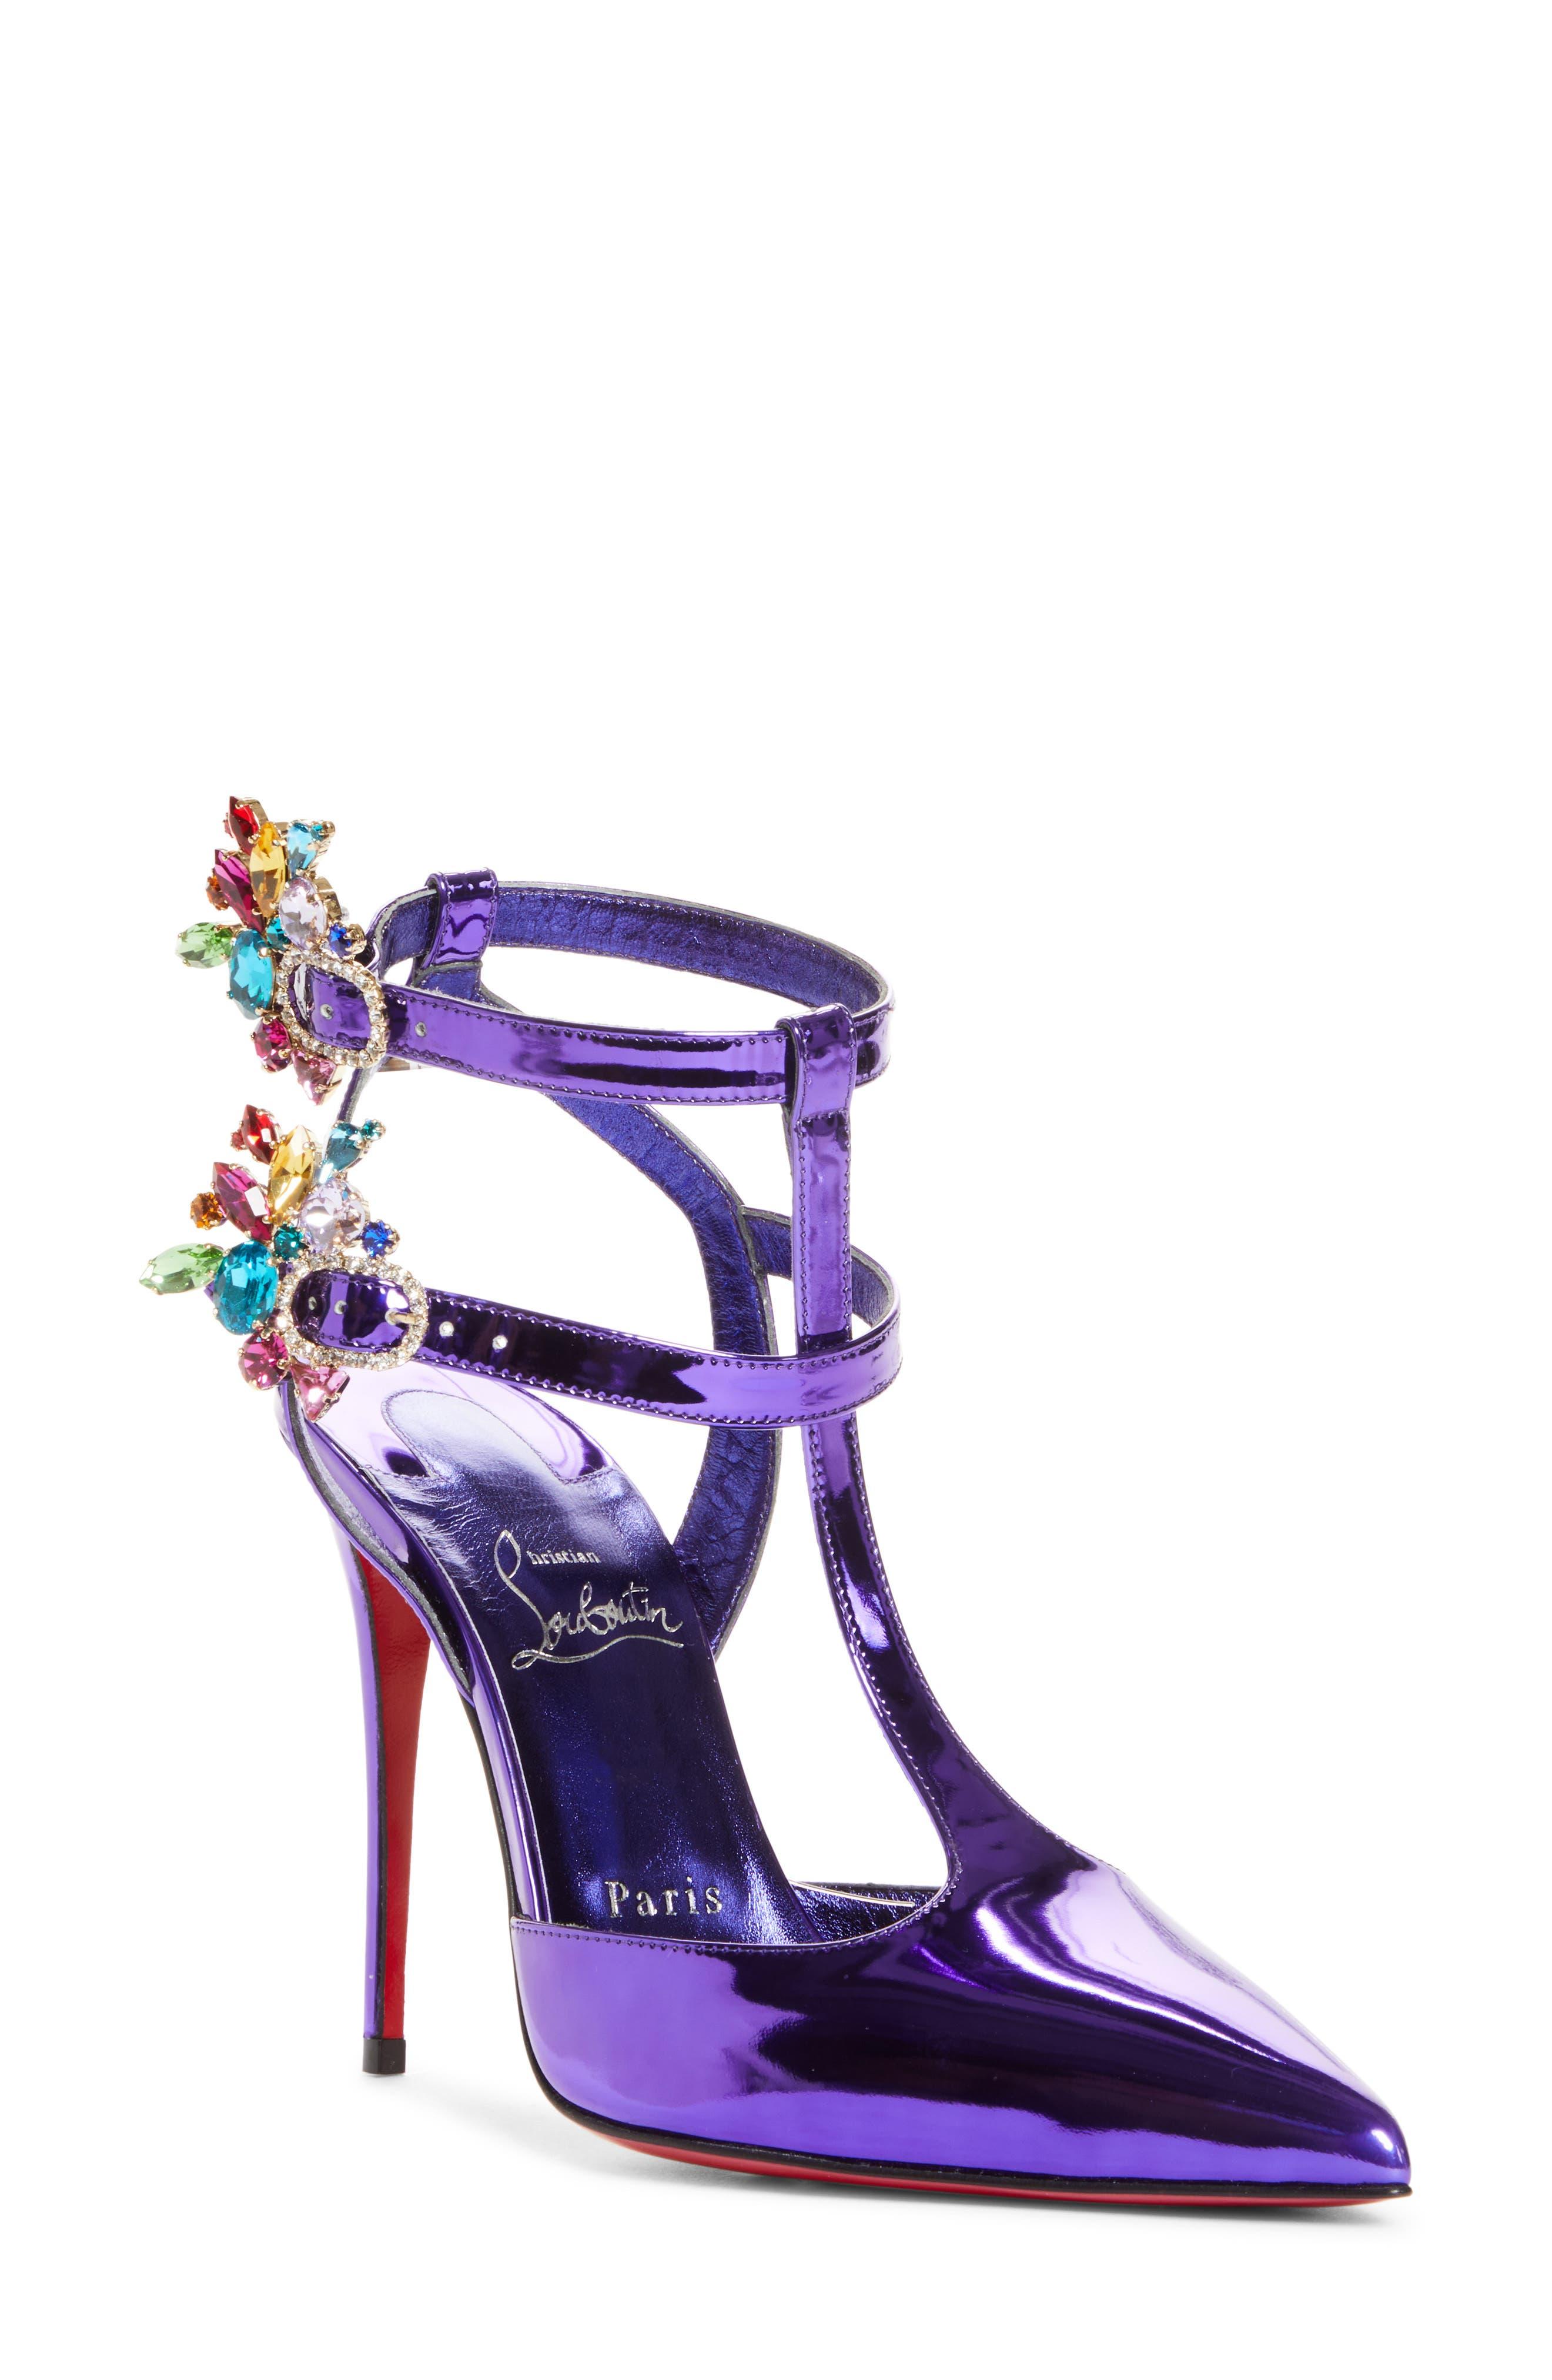 Lipstrass Crepe Crystal Embellished Pumps in Multicoloured